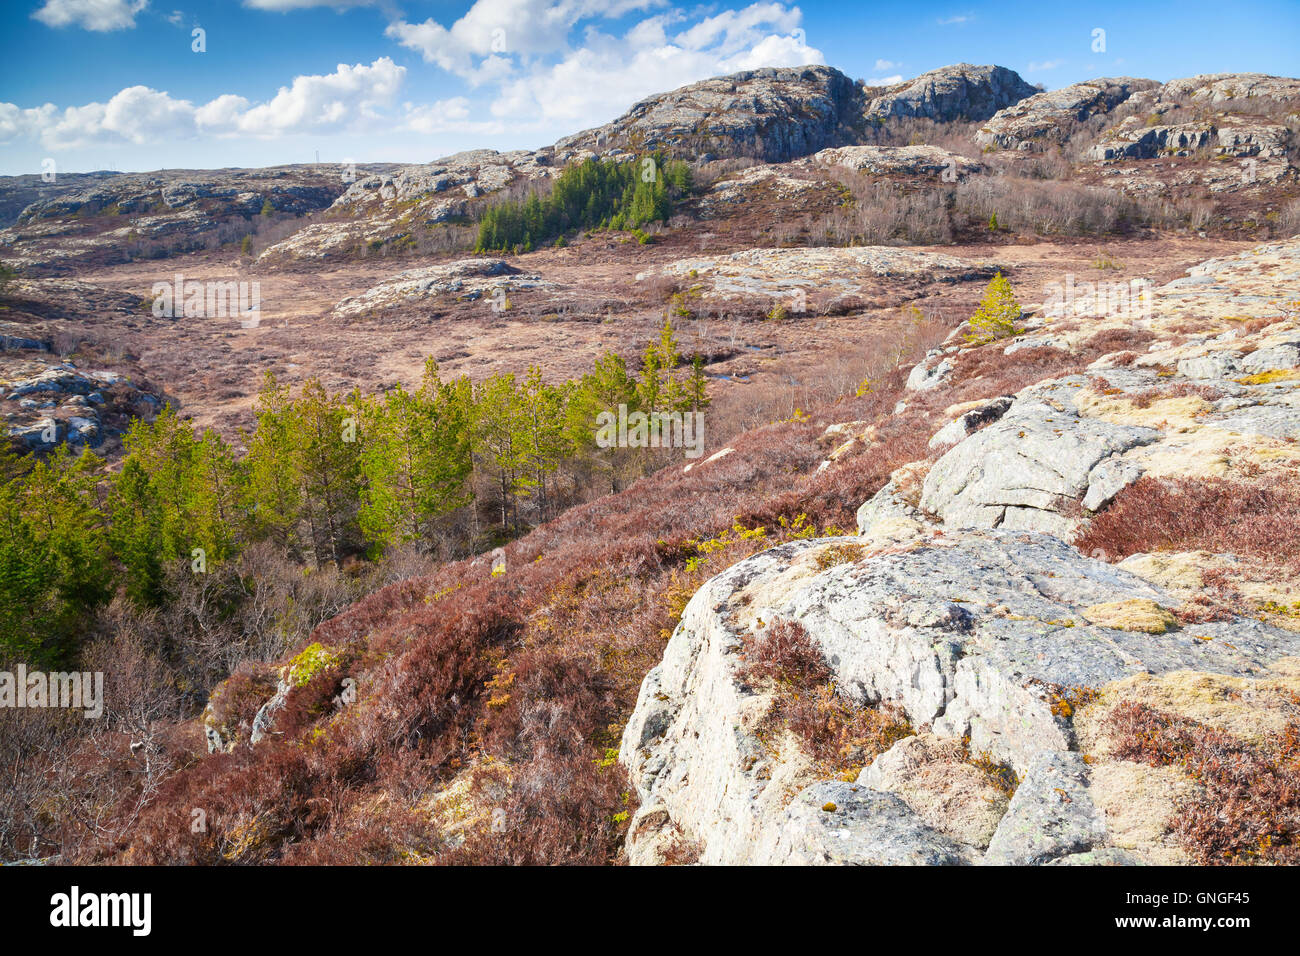 Northern Norway in springtime. Mountain landscape with pine trees and red moss growing on rocks Stock Photo